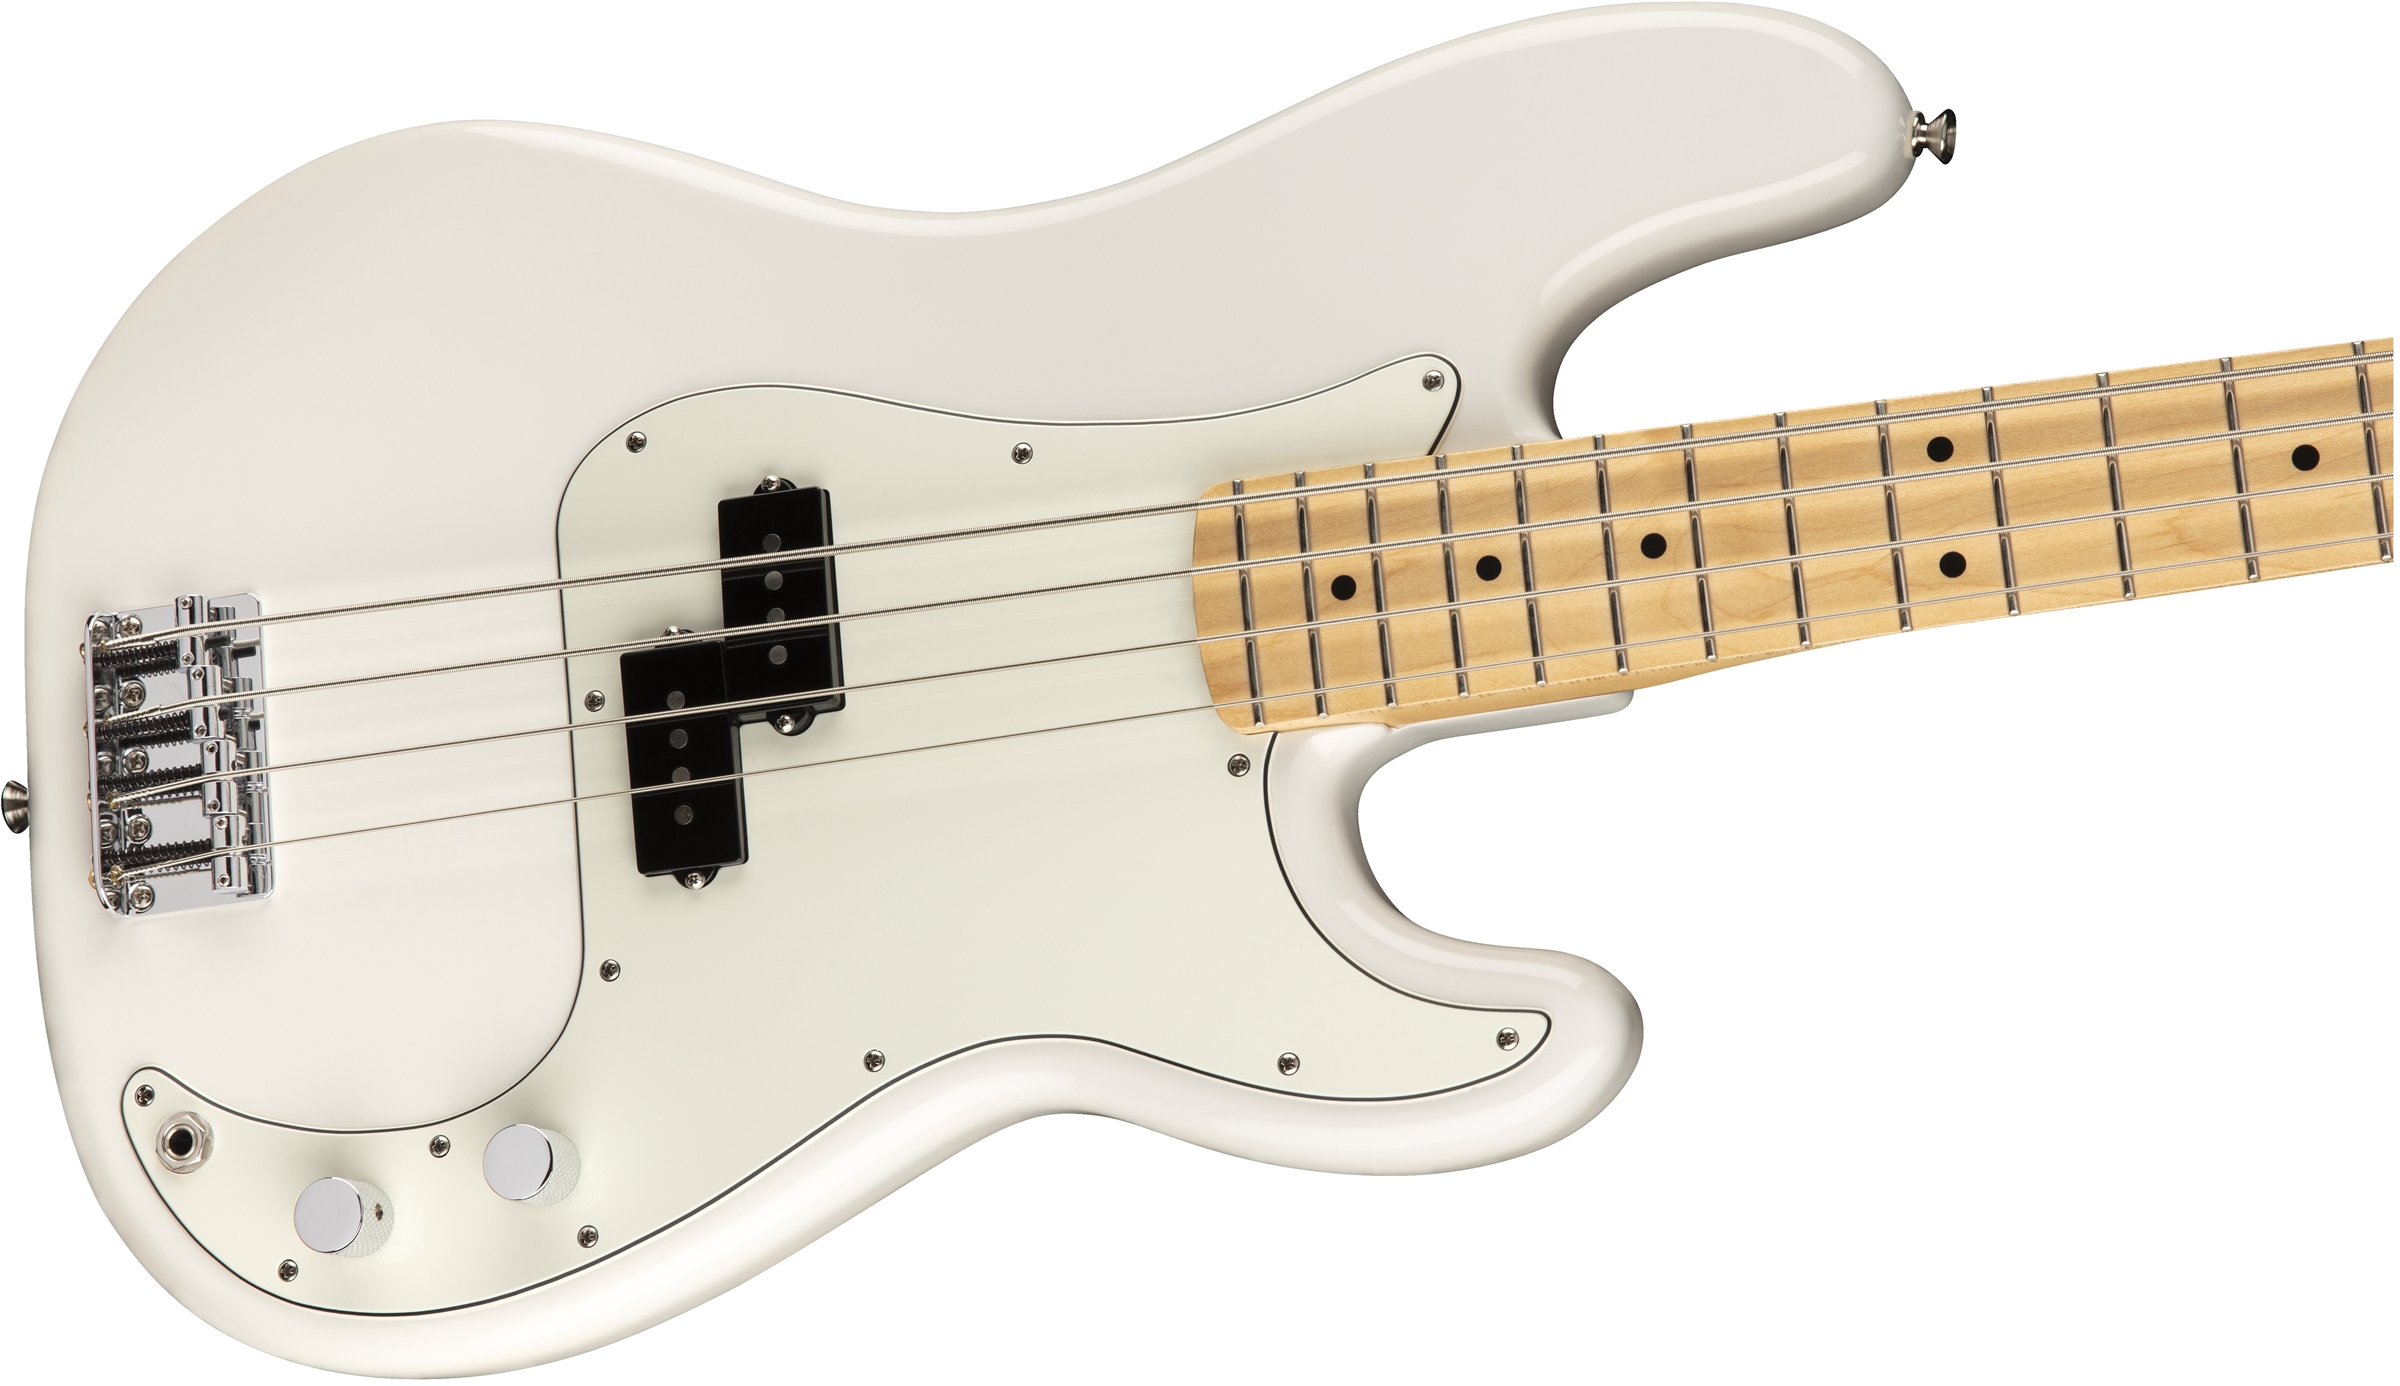 Fender Precision Bass Player Mex Mn - Polar White - Solid body electric bass - Variation 3